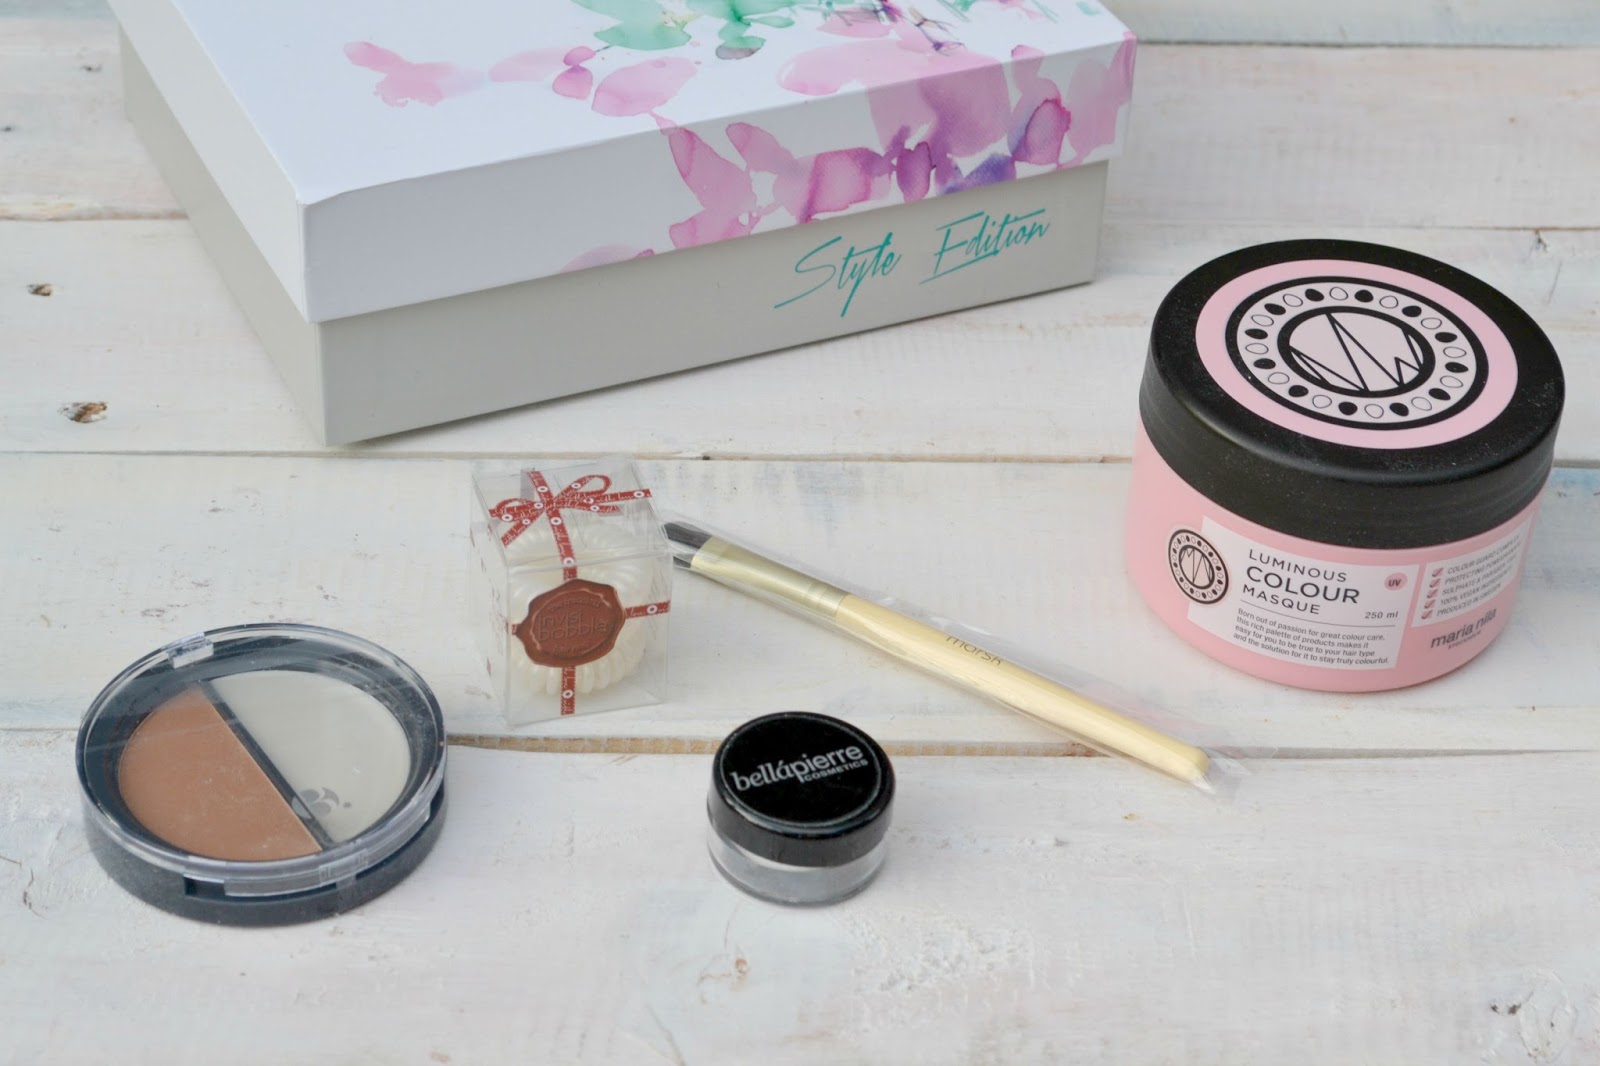 September Glossybox Review